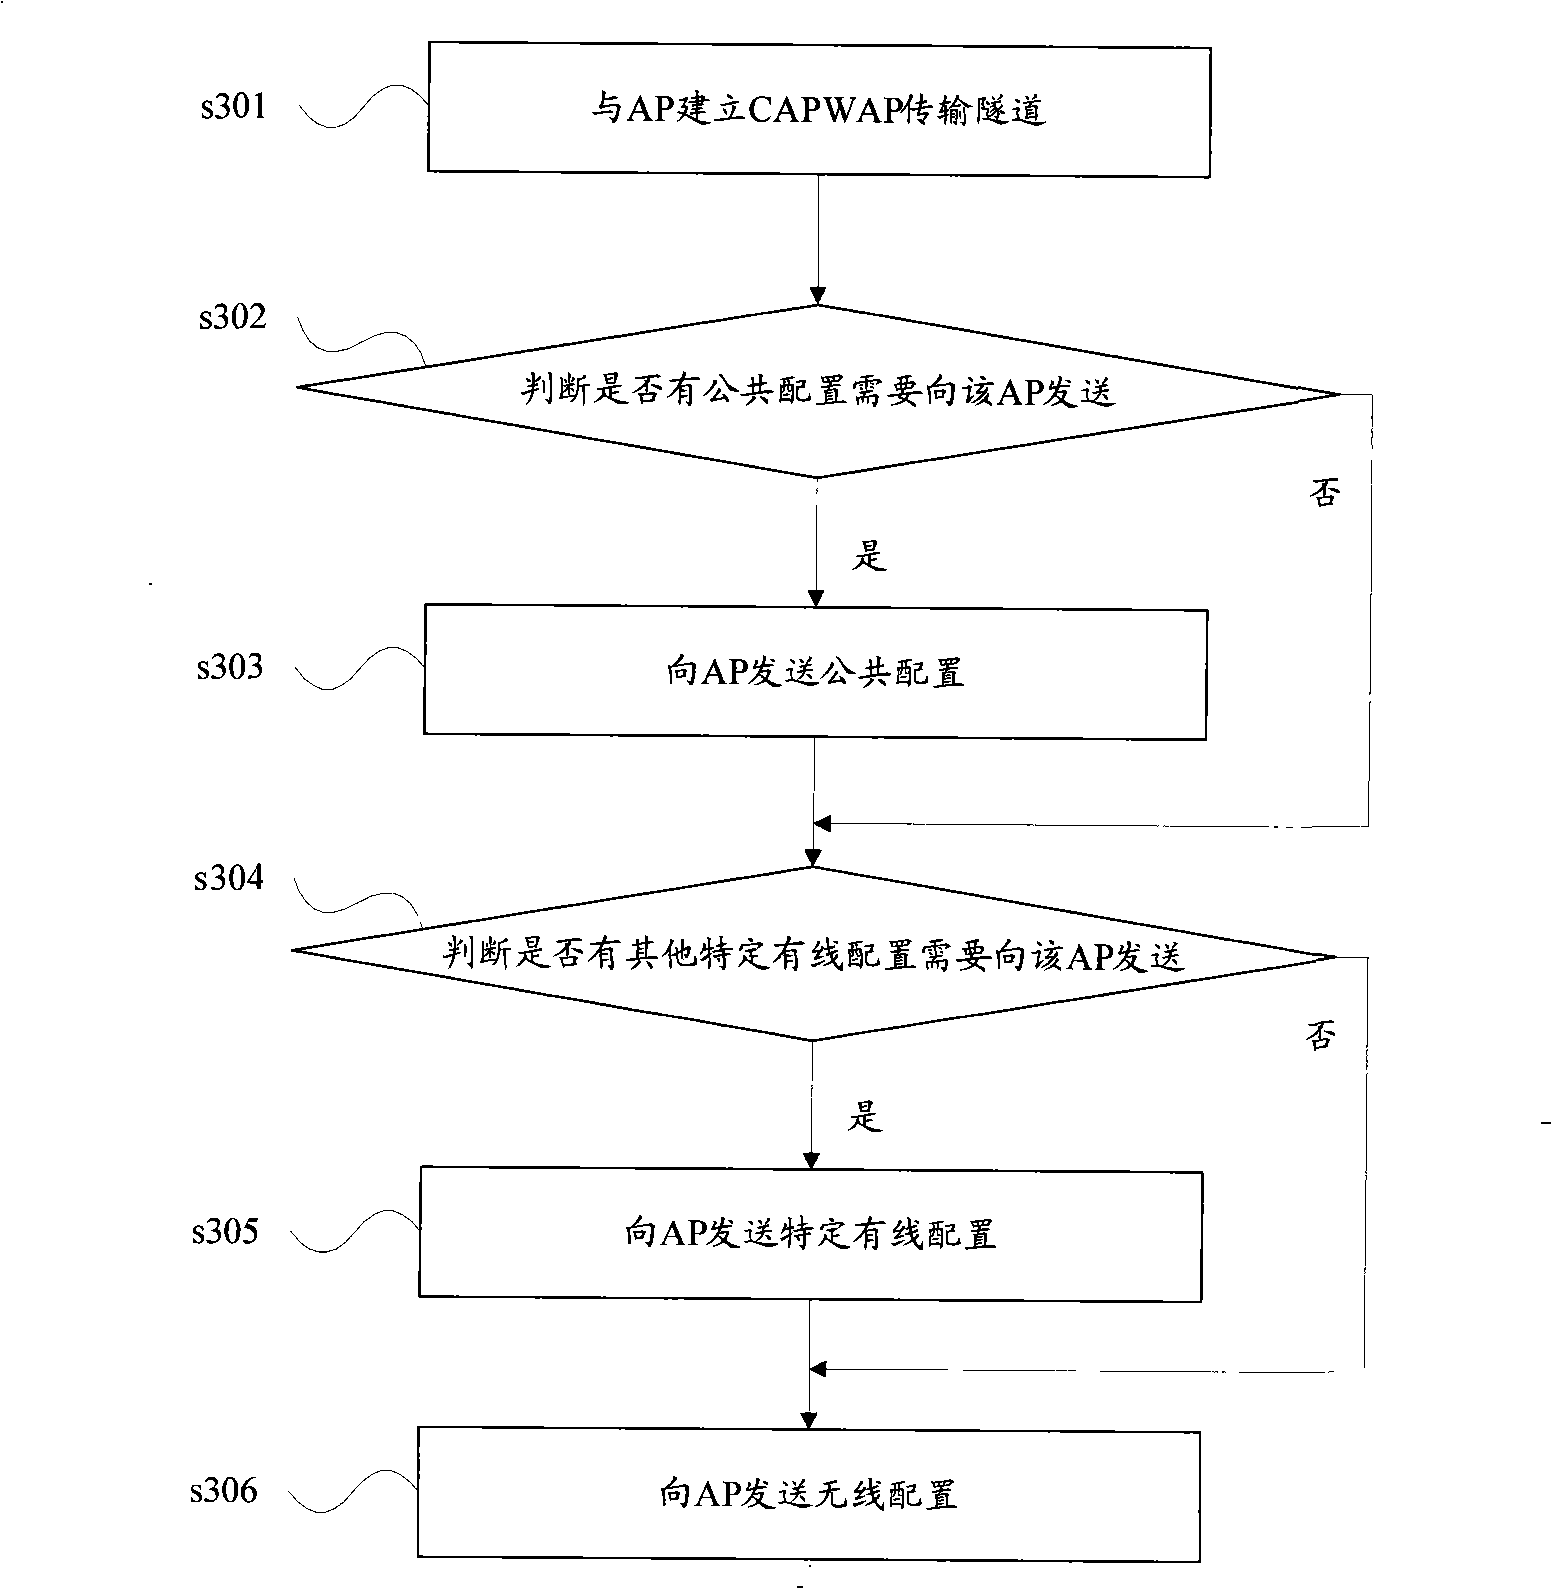 Configuration transmitting method, access control equipment and access point